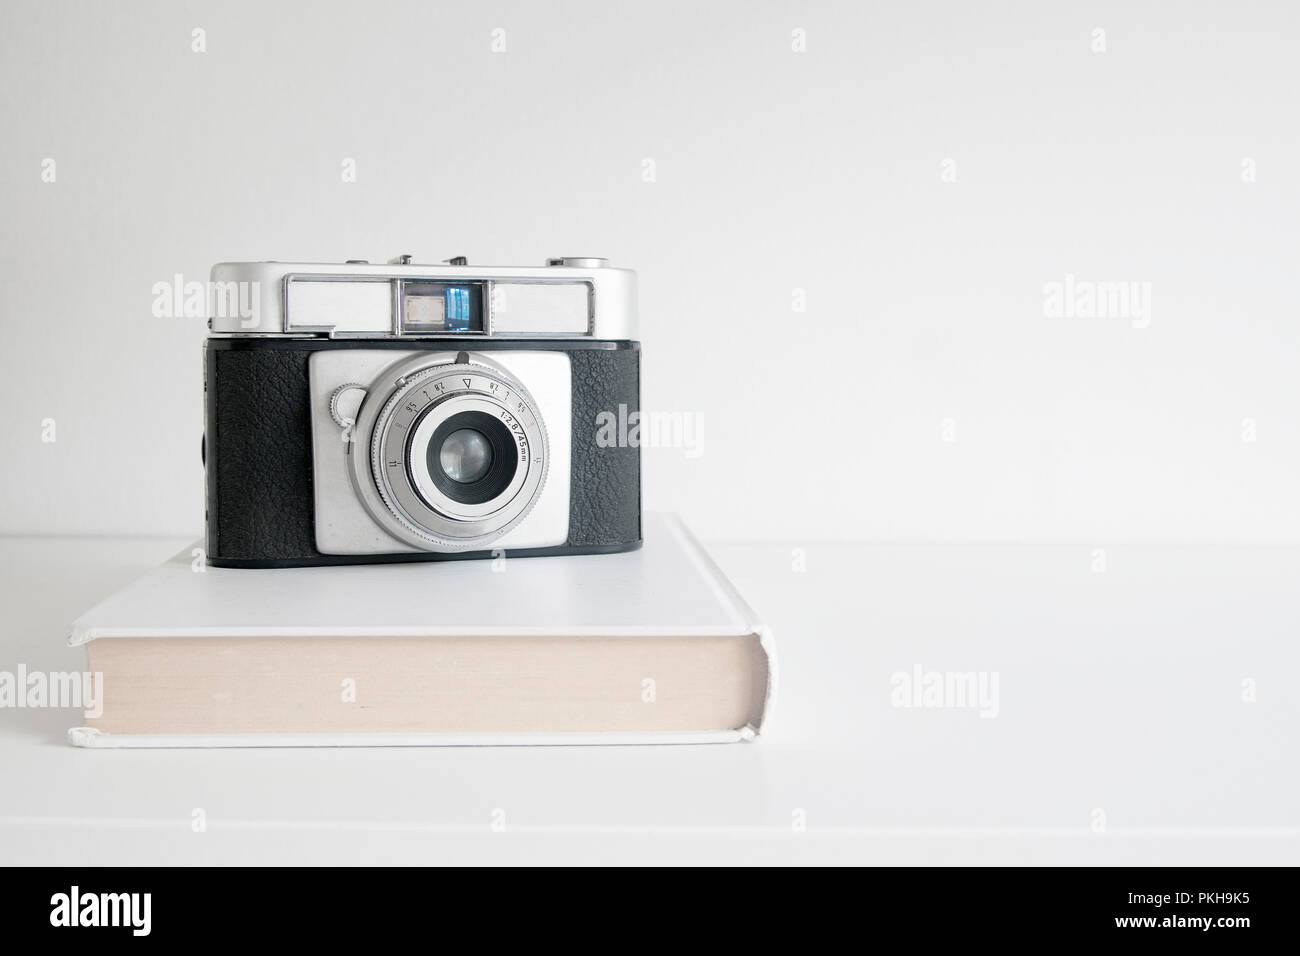 Camera on a white photo book on a wooden shelf. White background and empty copy space for Editor's text. Stock Photo